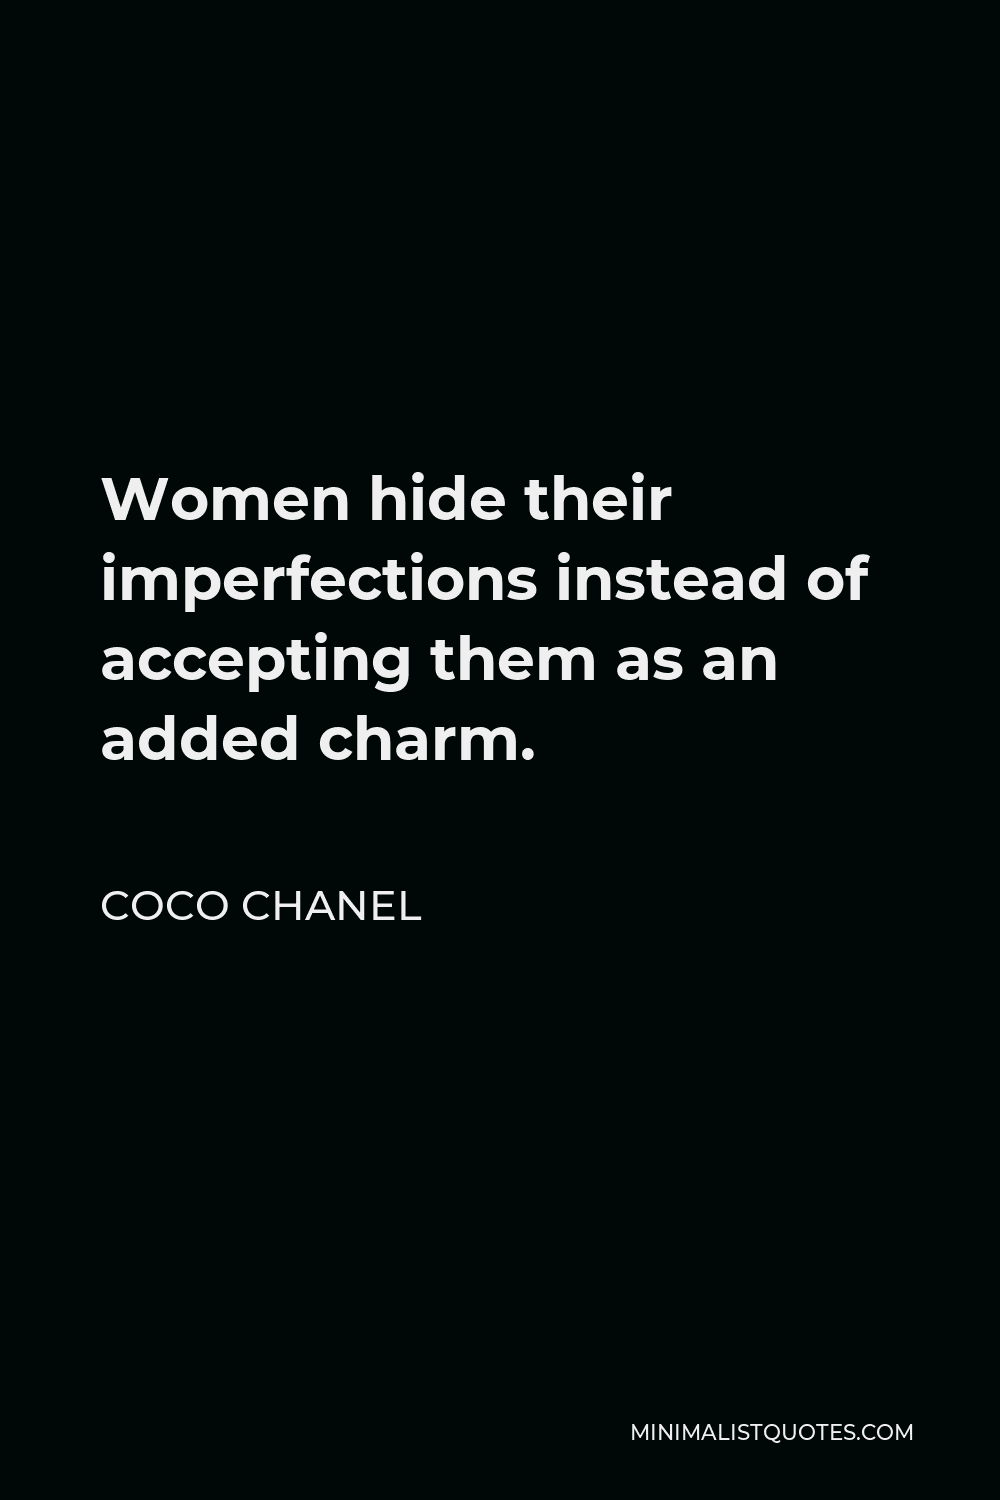 Coco Chanel Quote - Women hide their imperfections instead of accepting them as an added charm.